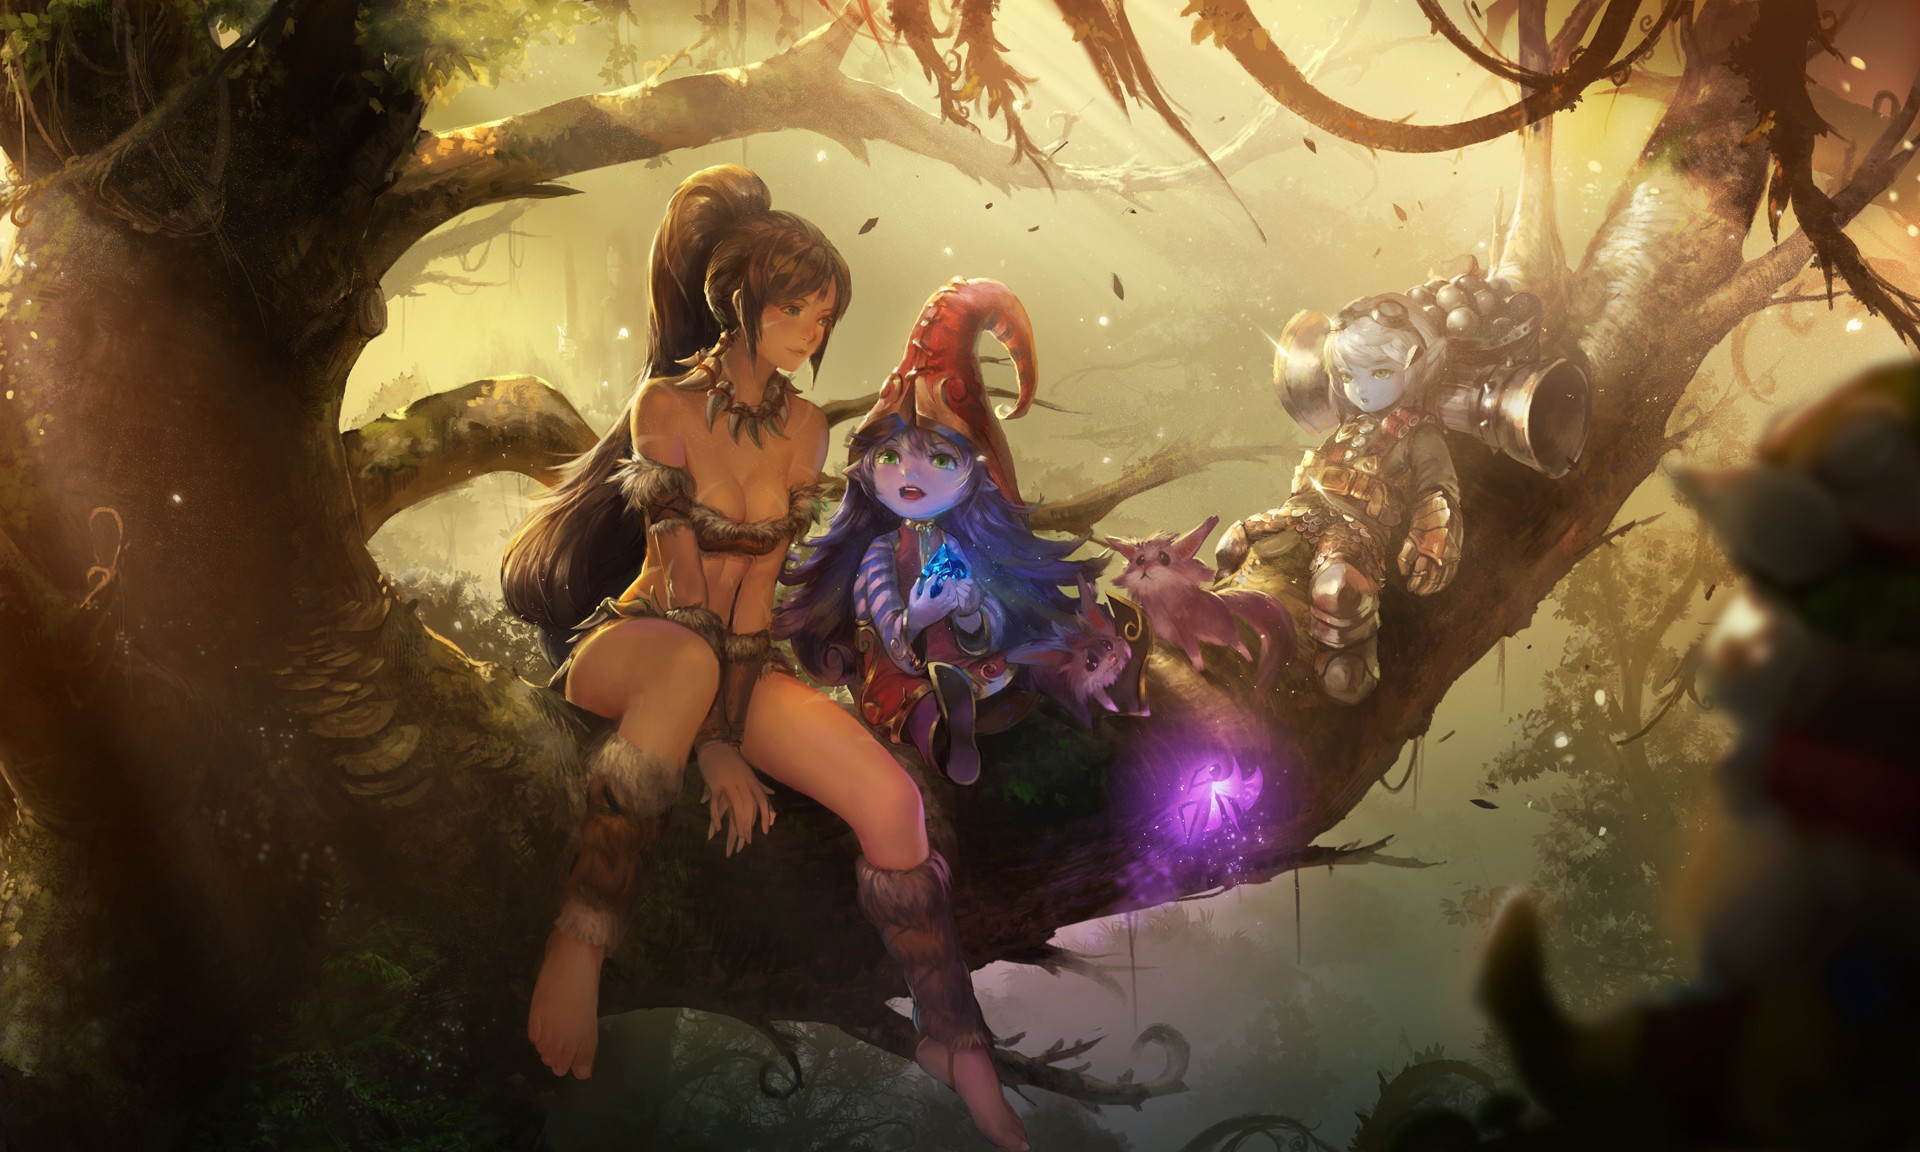 Anime 1920x1152 League of Legends Lulu (League of Legends) Nidalee (League of Legends) trees video games Tristana (League of Legends) Teemo (League of Legends) video game girls boobs cleavage DeviantArt fantasy art fantasy girl PC gaming